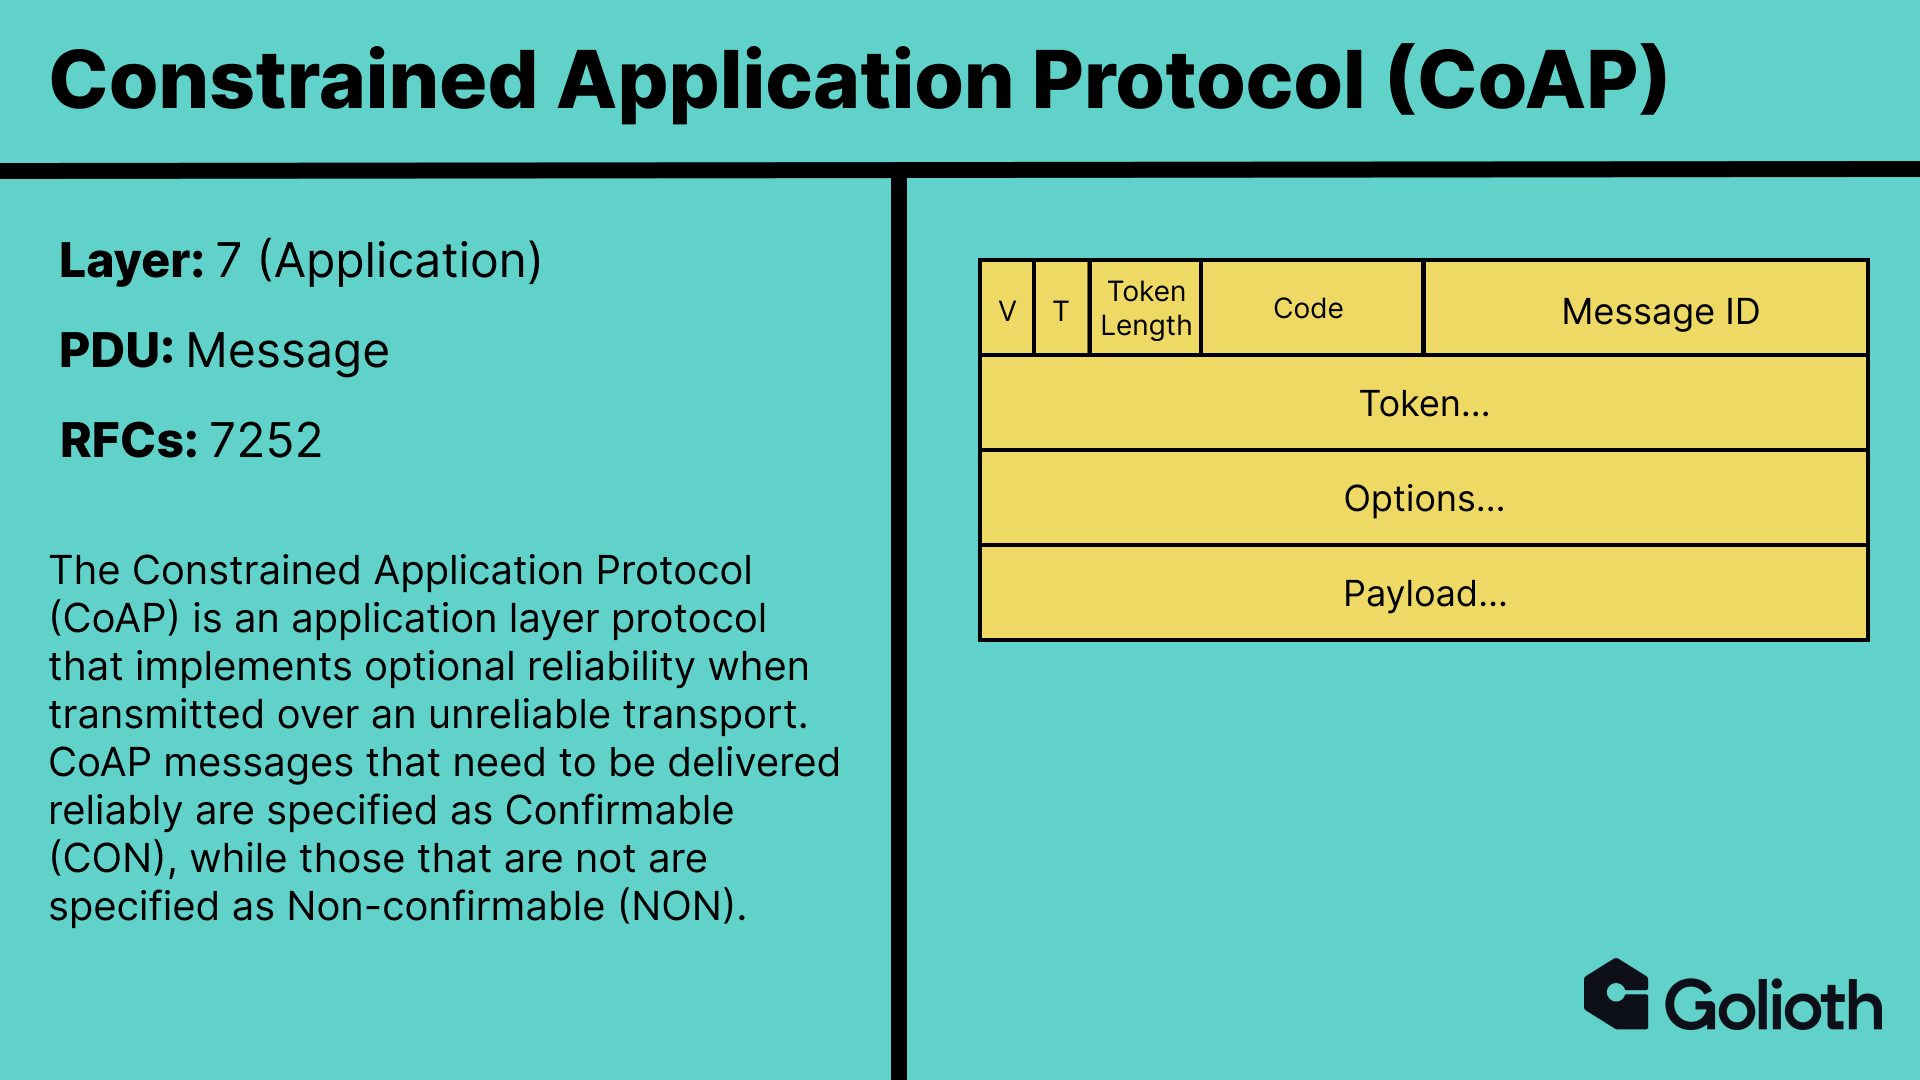 Description of the Constrained Application Protocol (CoAP) with a diagram.